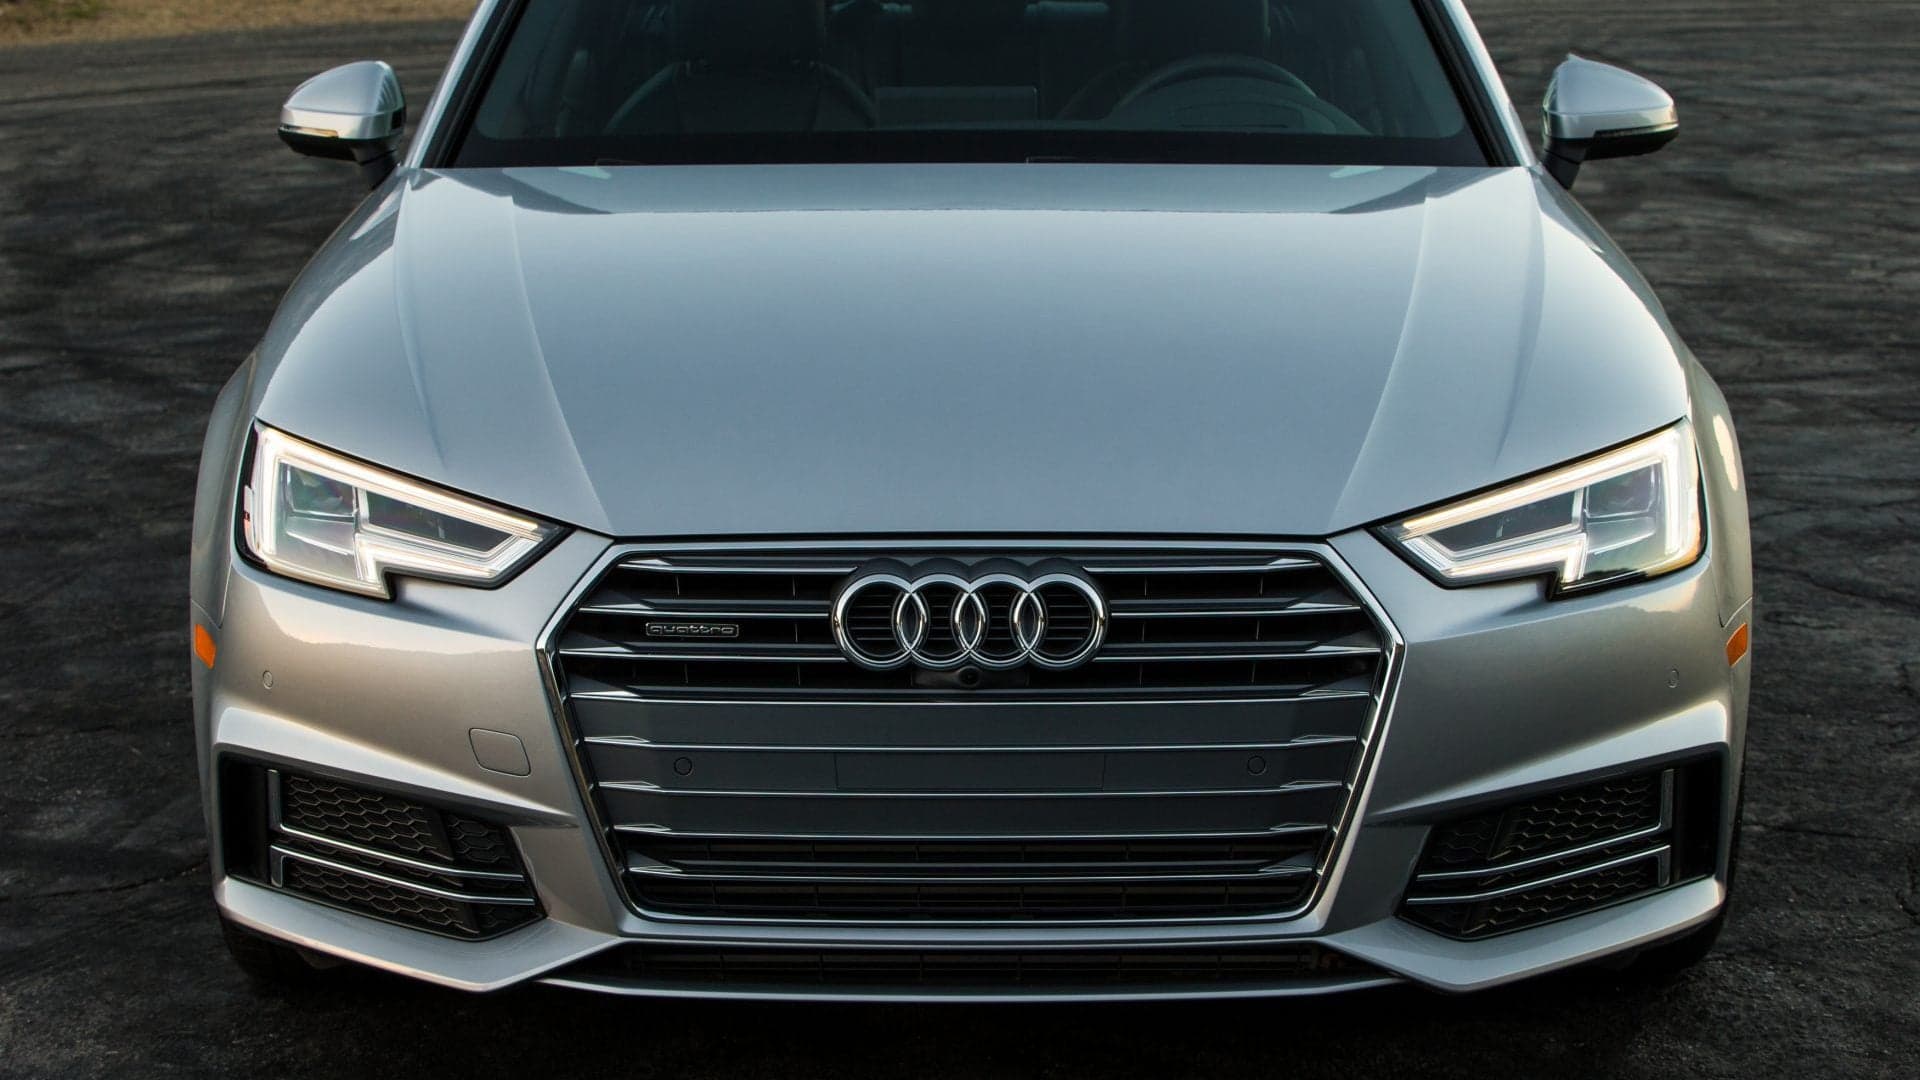 Audis Will No Longer All Look the Same